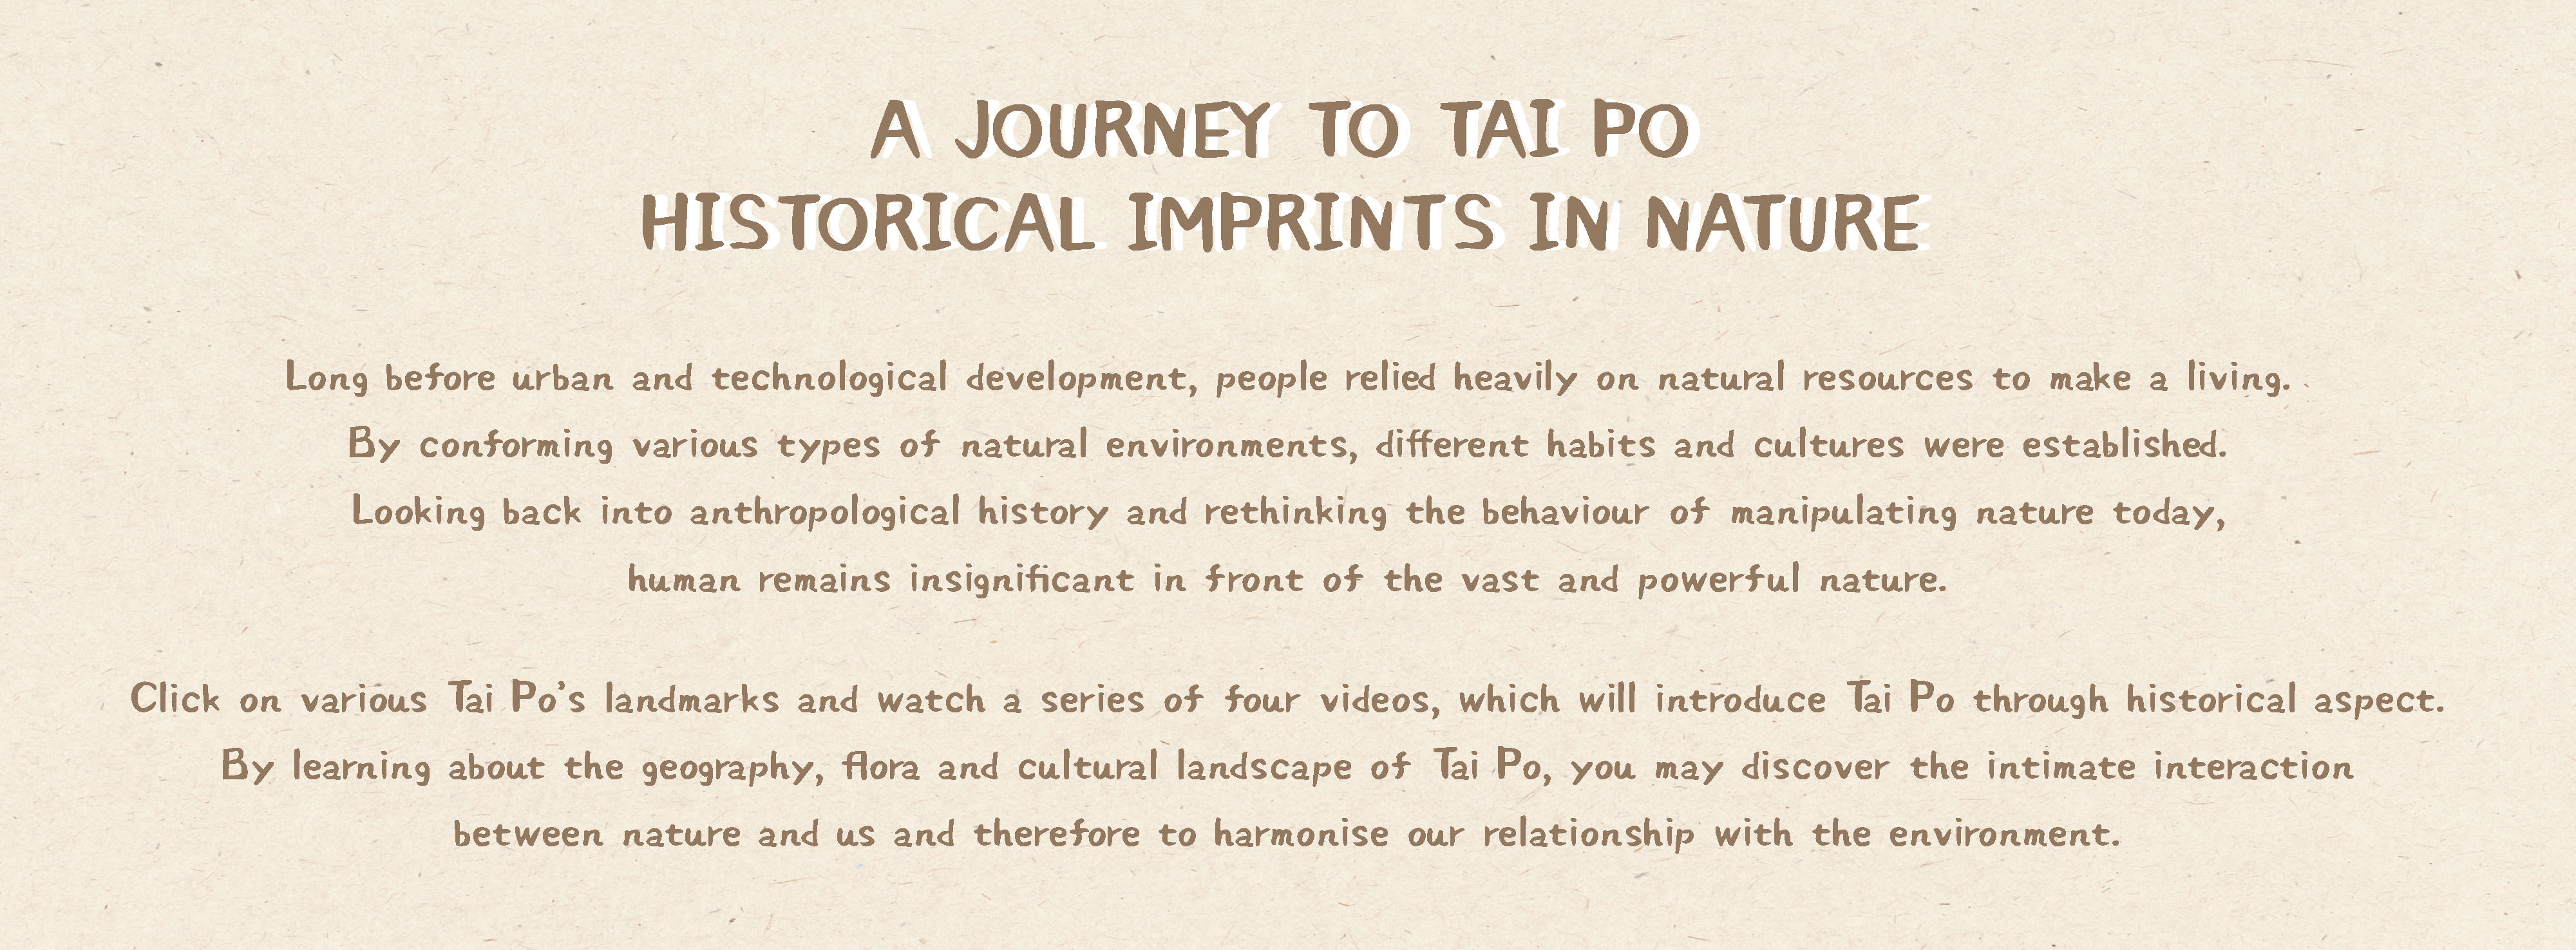 A Journey to Tai Po: Historical Imprints in Nature